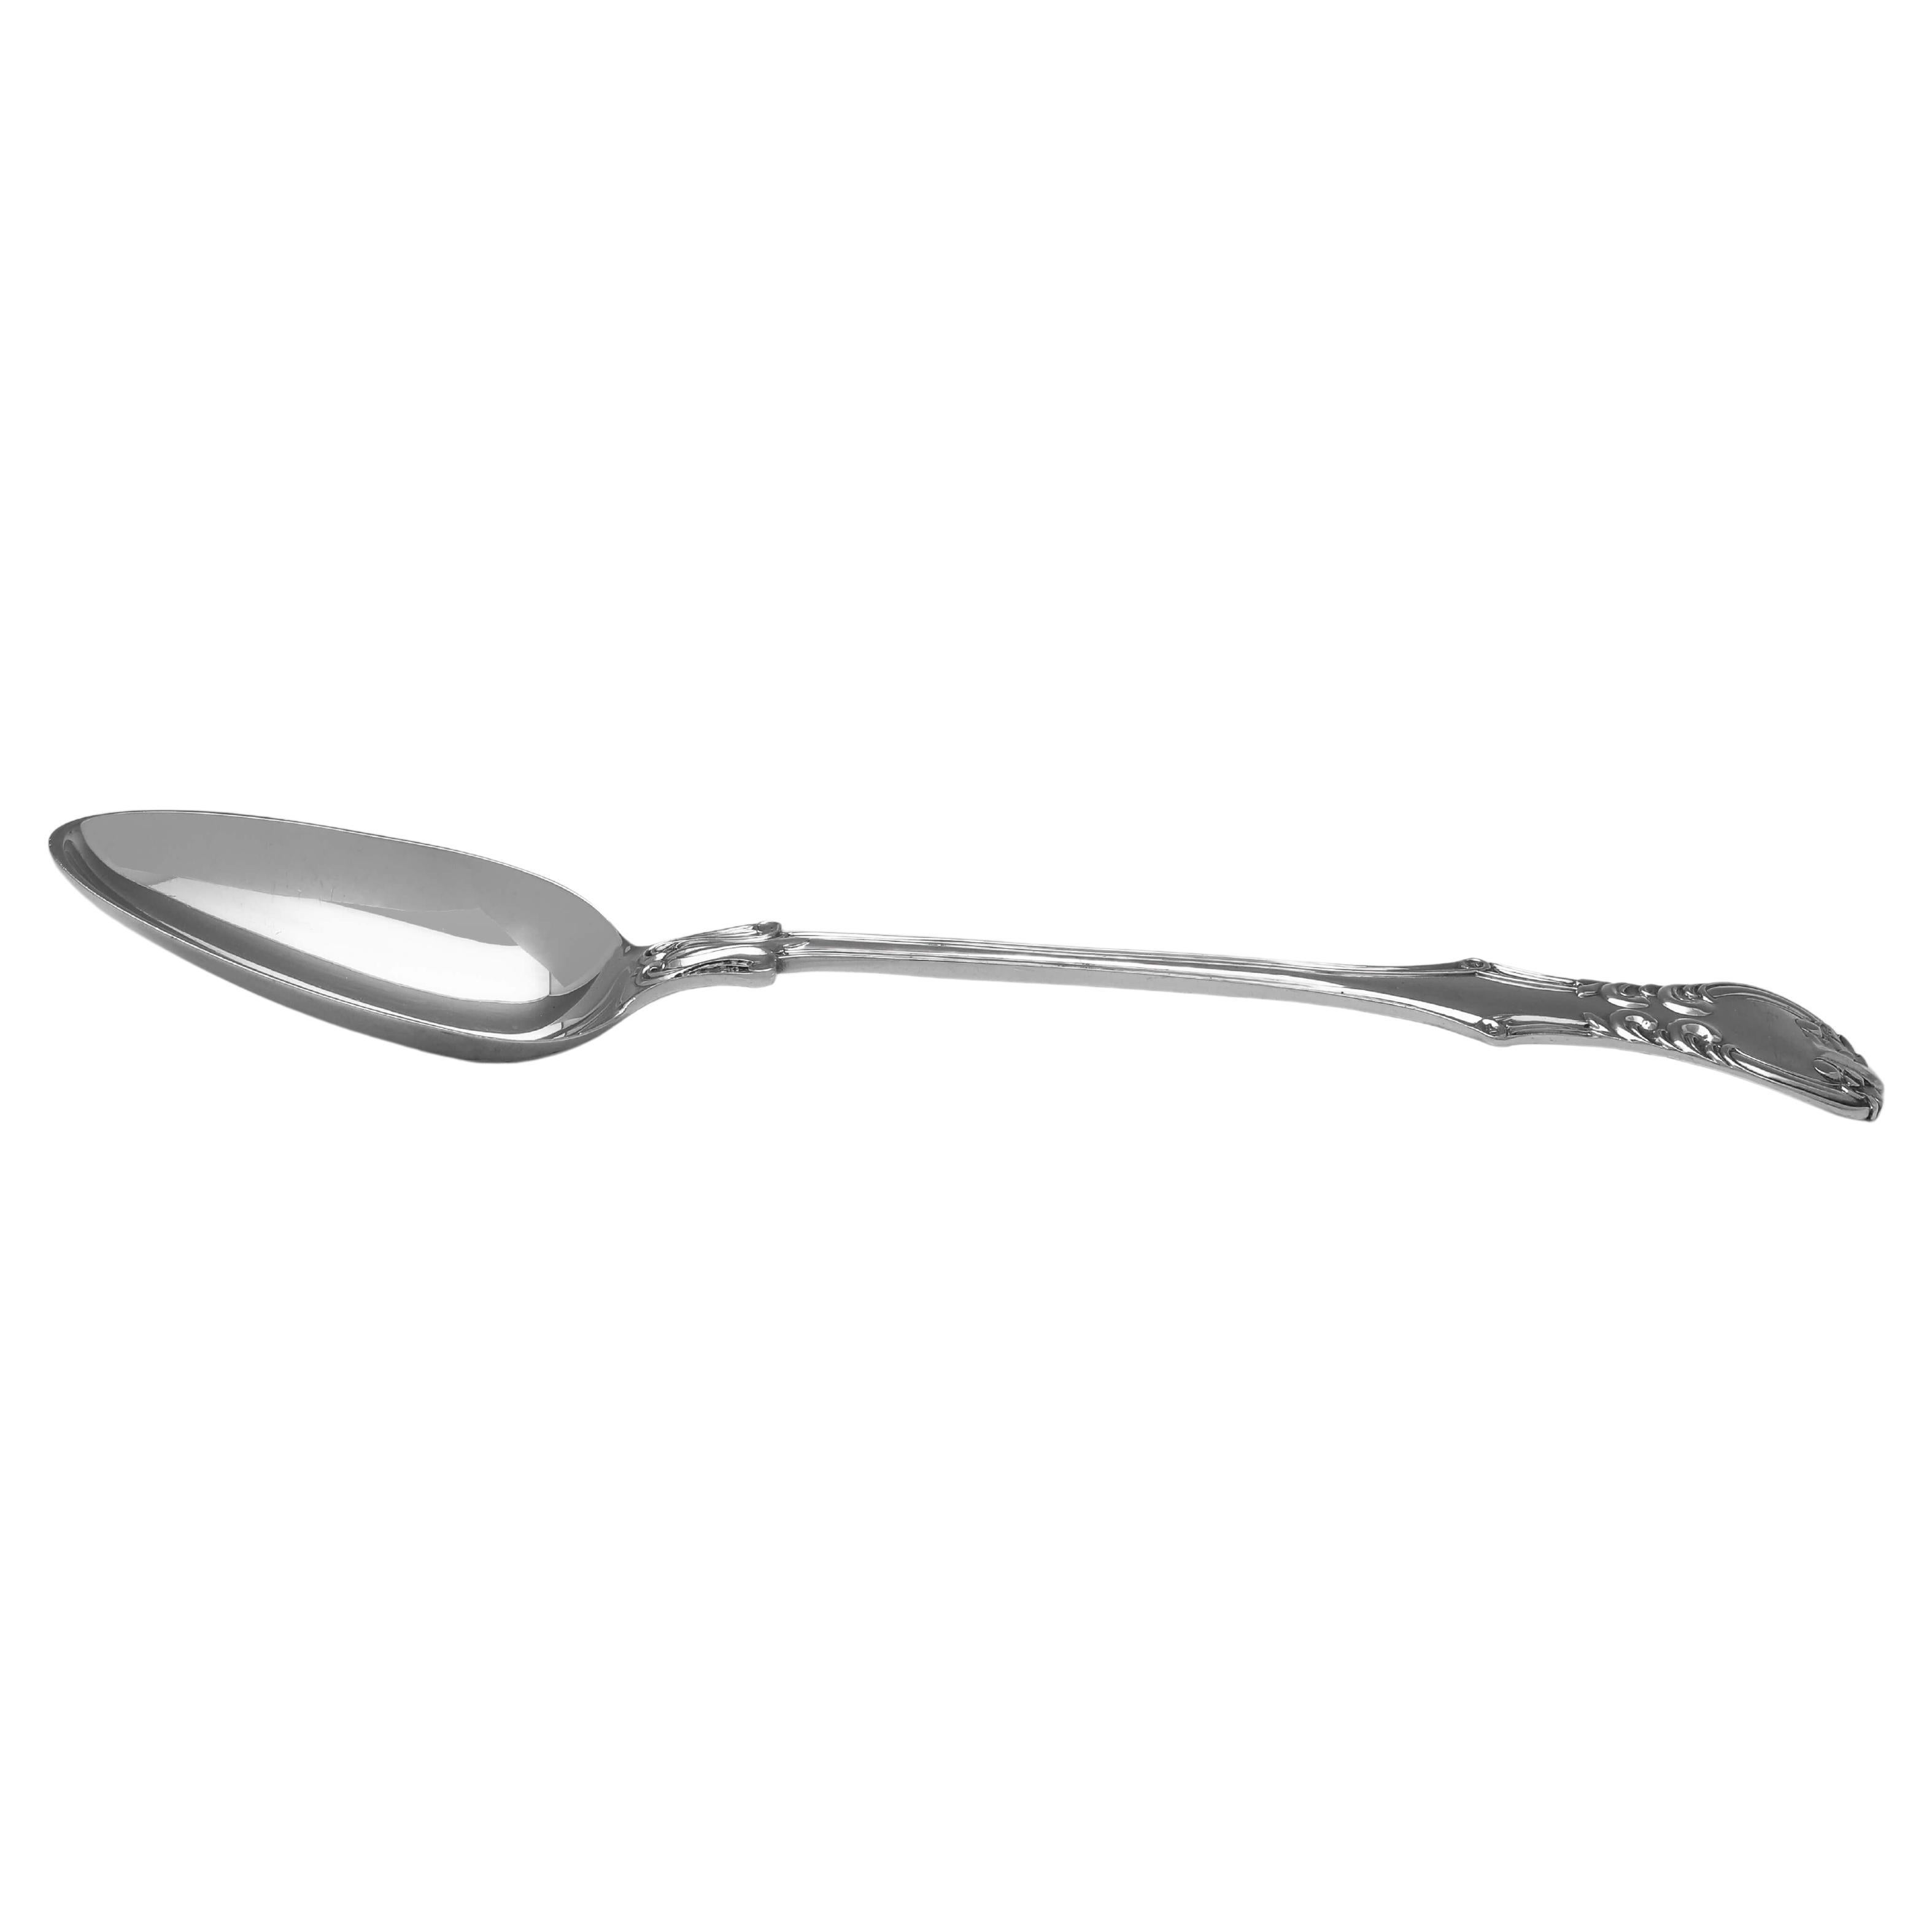 Sterling Silver 'Victoria' Pattern Basting Spoon - London 1855 For Sale